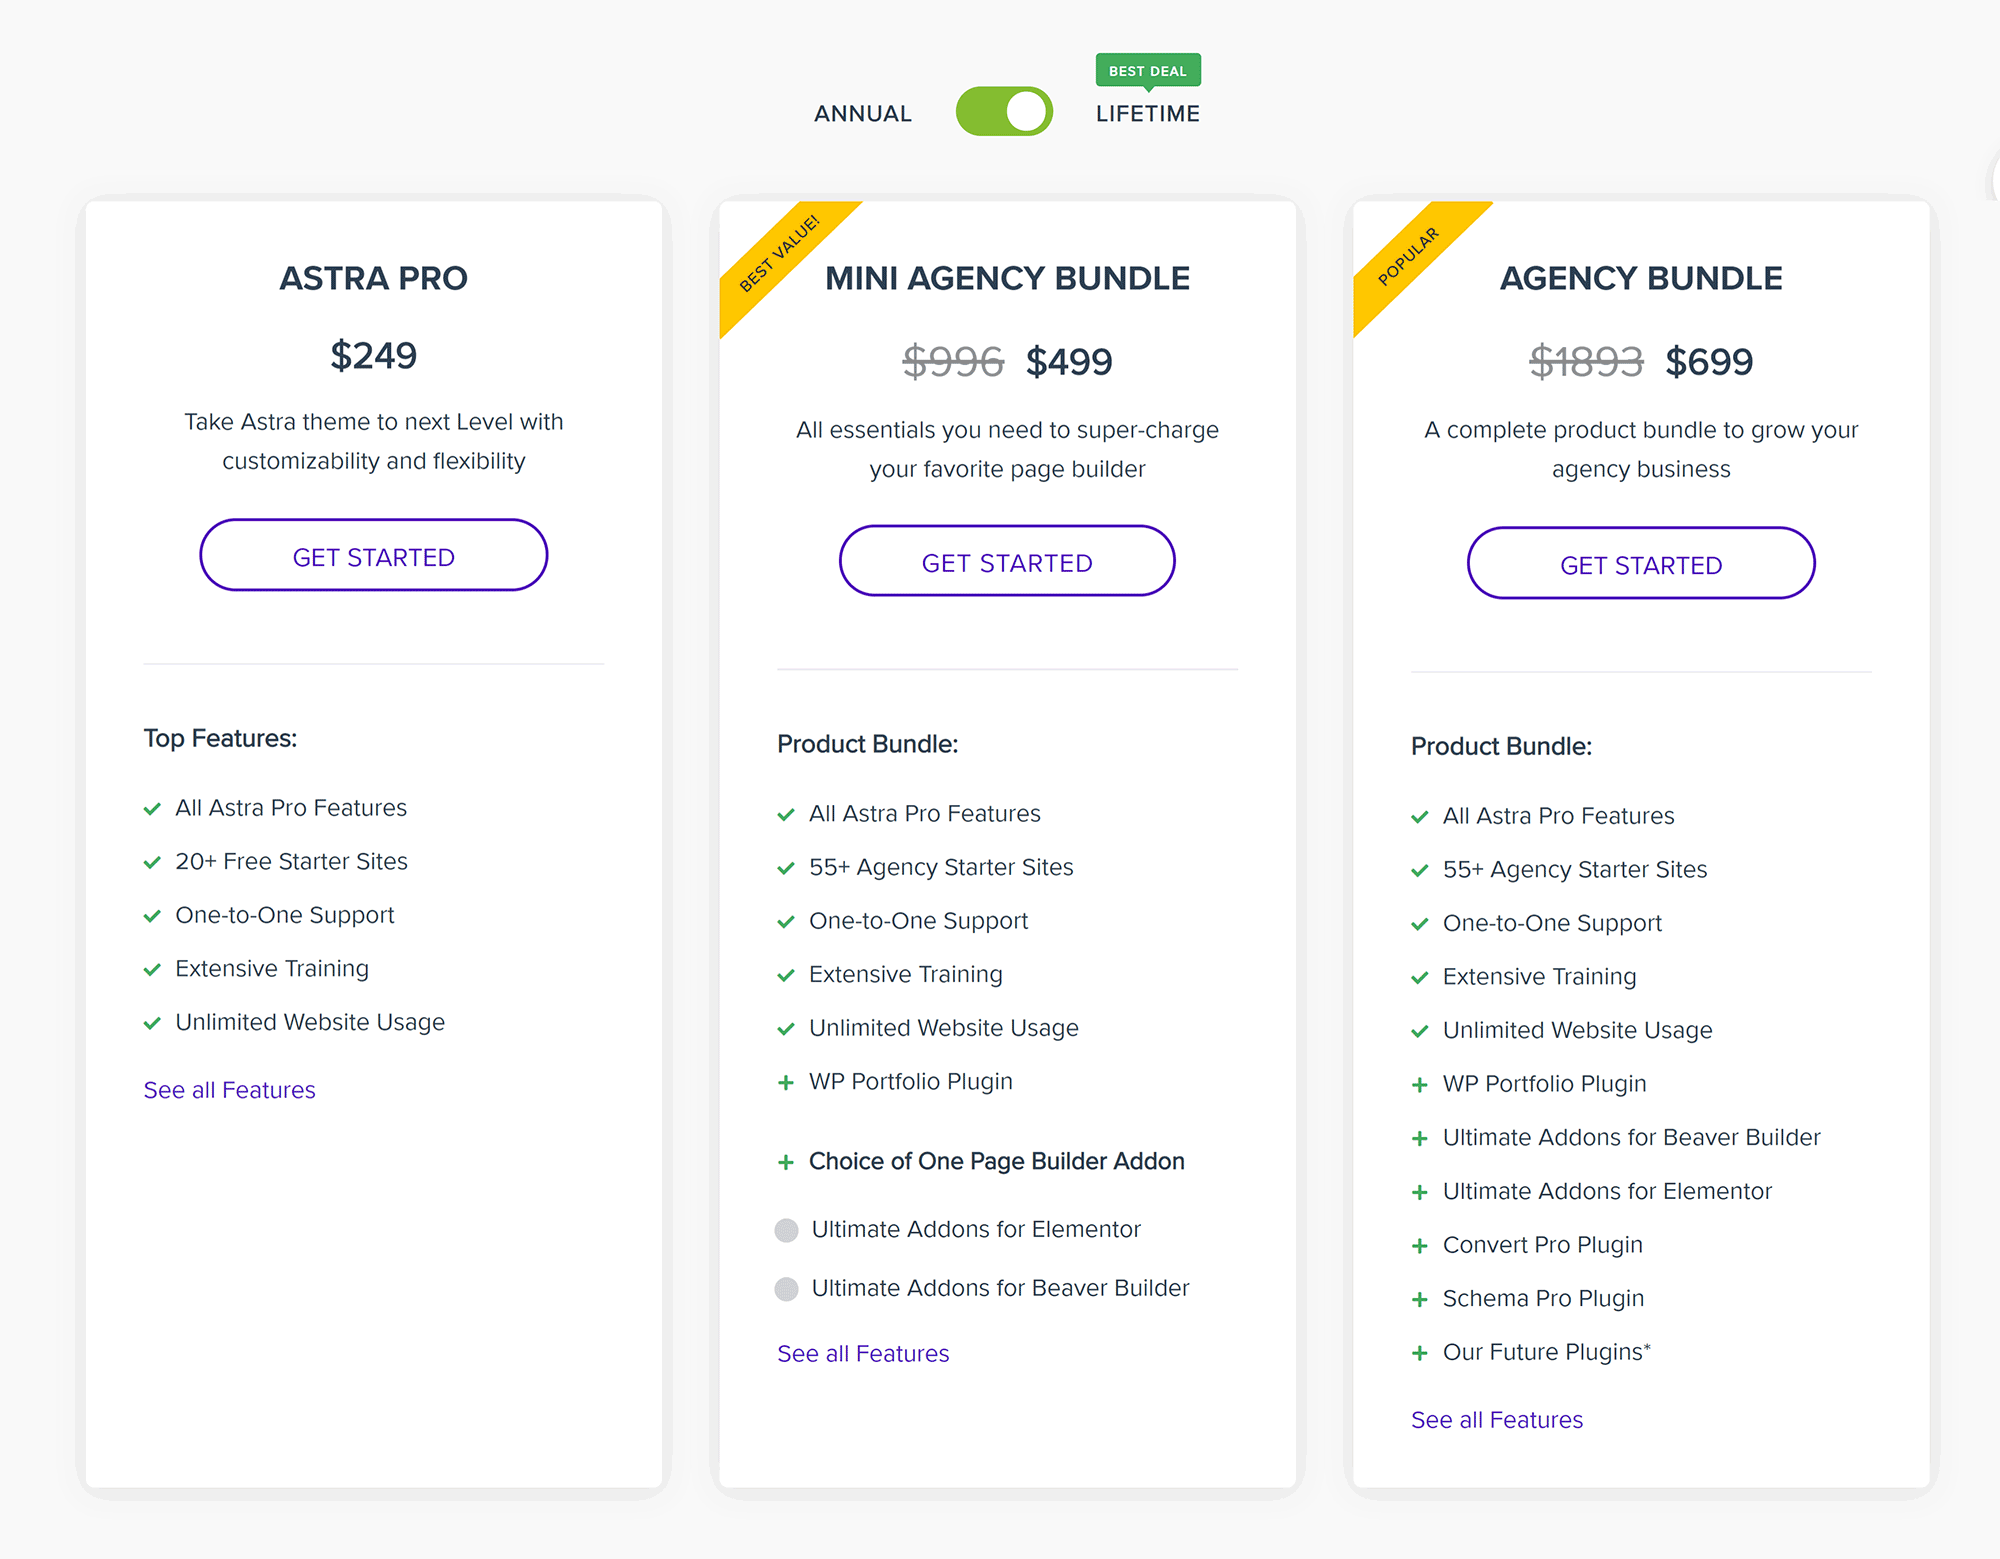 Lifetime Pricing for Astra